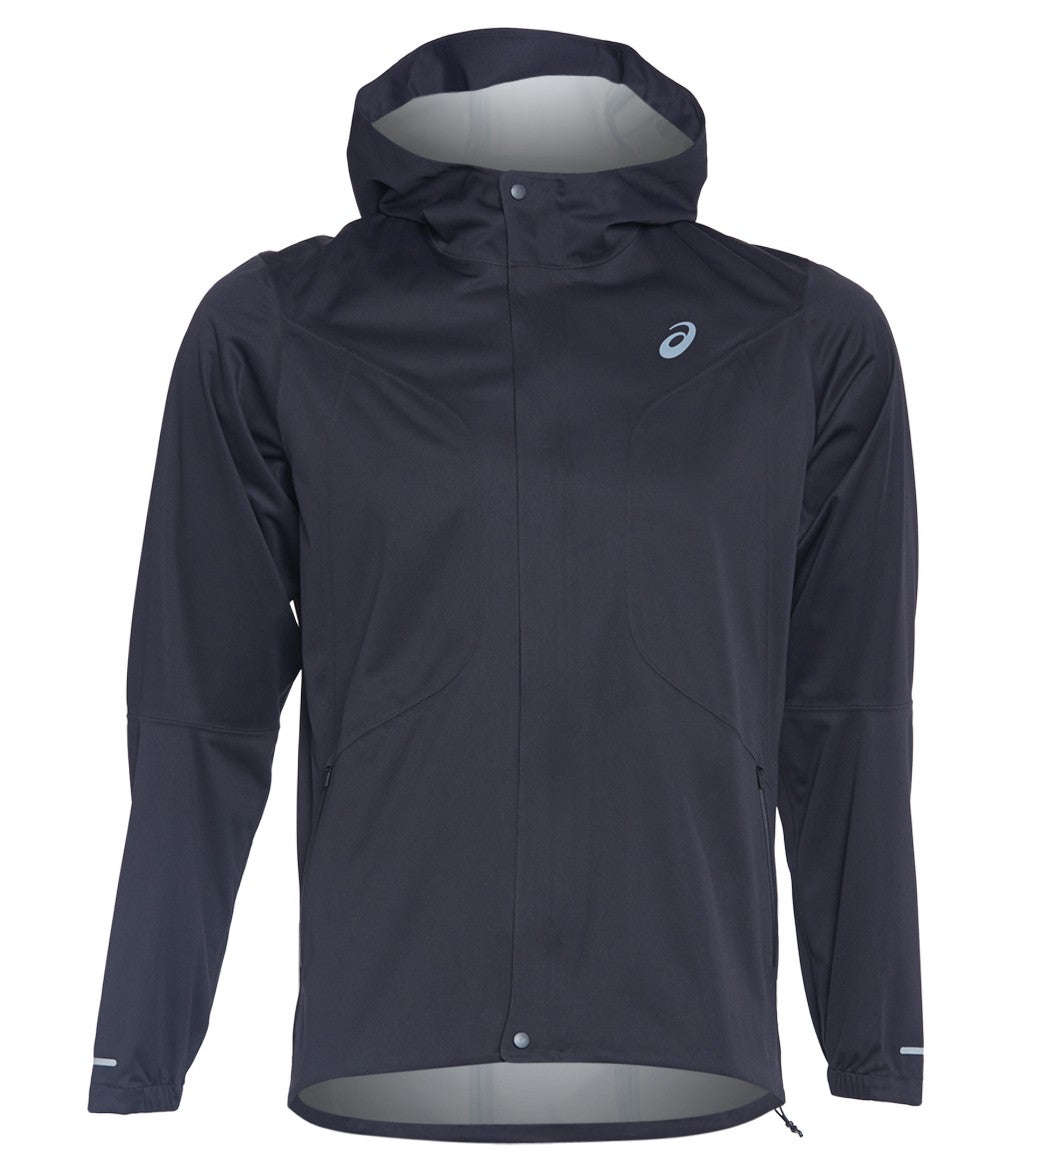 Asics Men's Accelerate Jacket - Performance Black Small Polyester - Swimoutlet.com